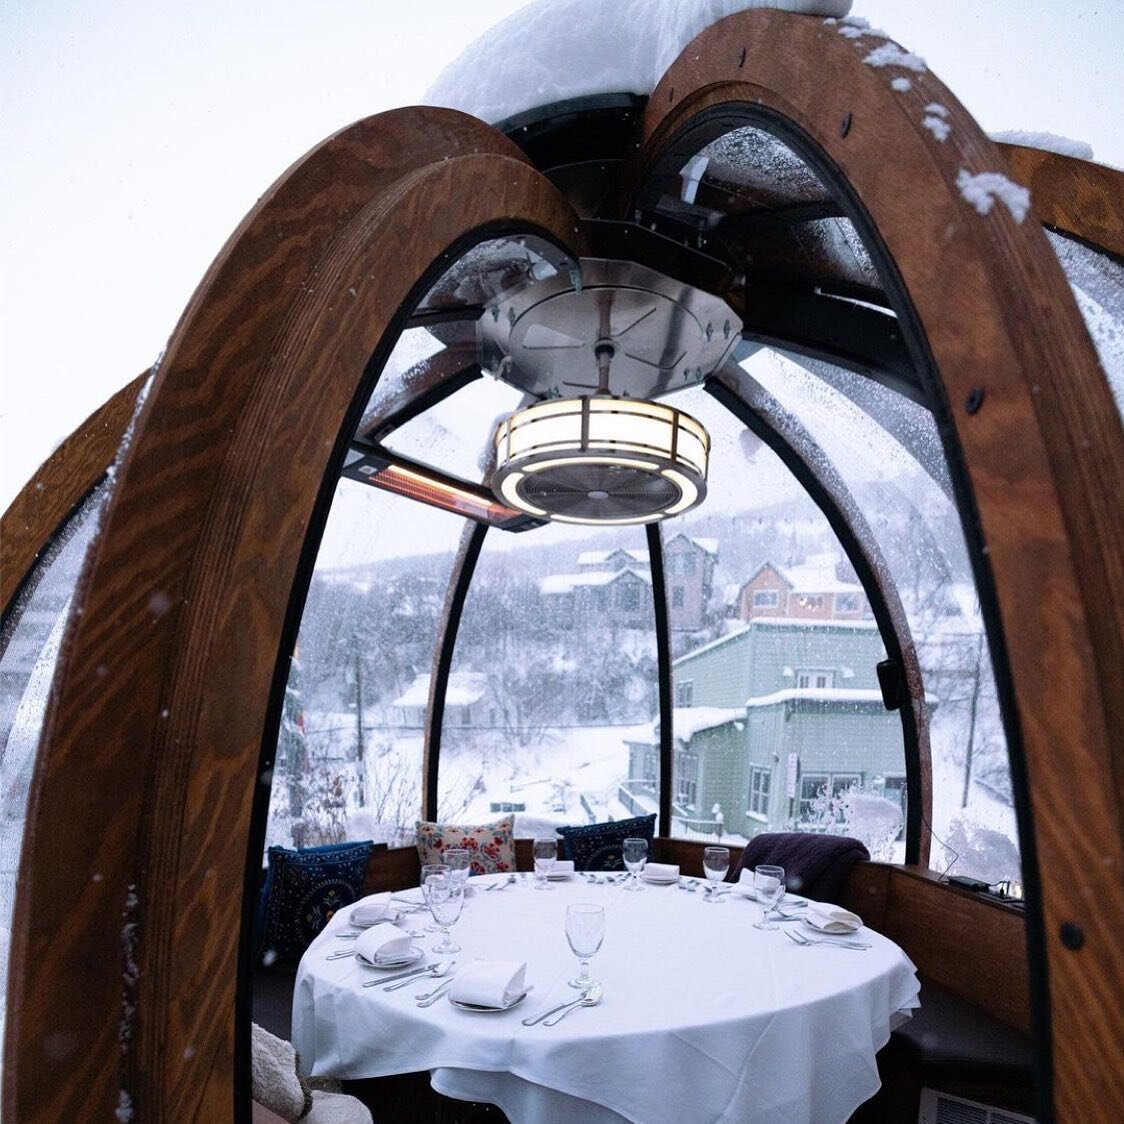 Repost from @billwhiterestaurants
&bull;
Our Alpenglobe at Grappa is a wonderful way to privately dine in a winter wonderland! Enjoy a cozy meal in our heated snow globe fitted with cozy blankets and pillows. You and up to 10 guests can share an even